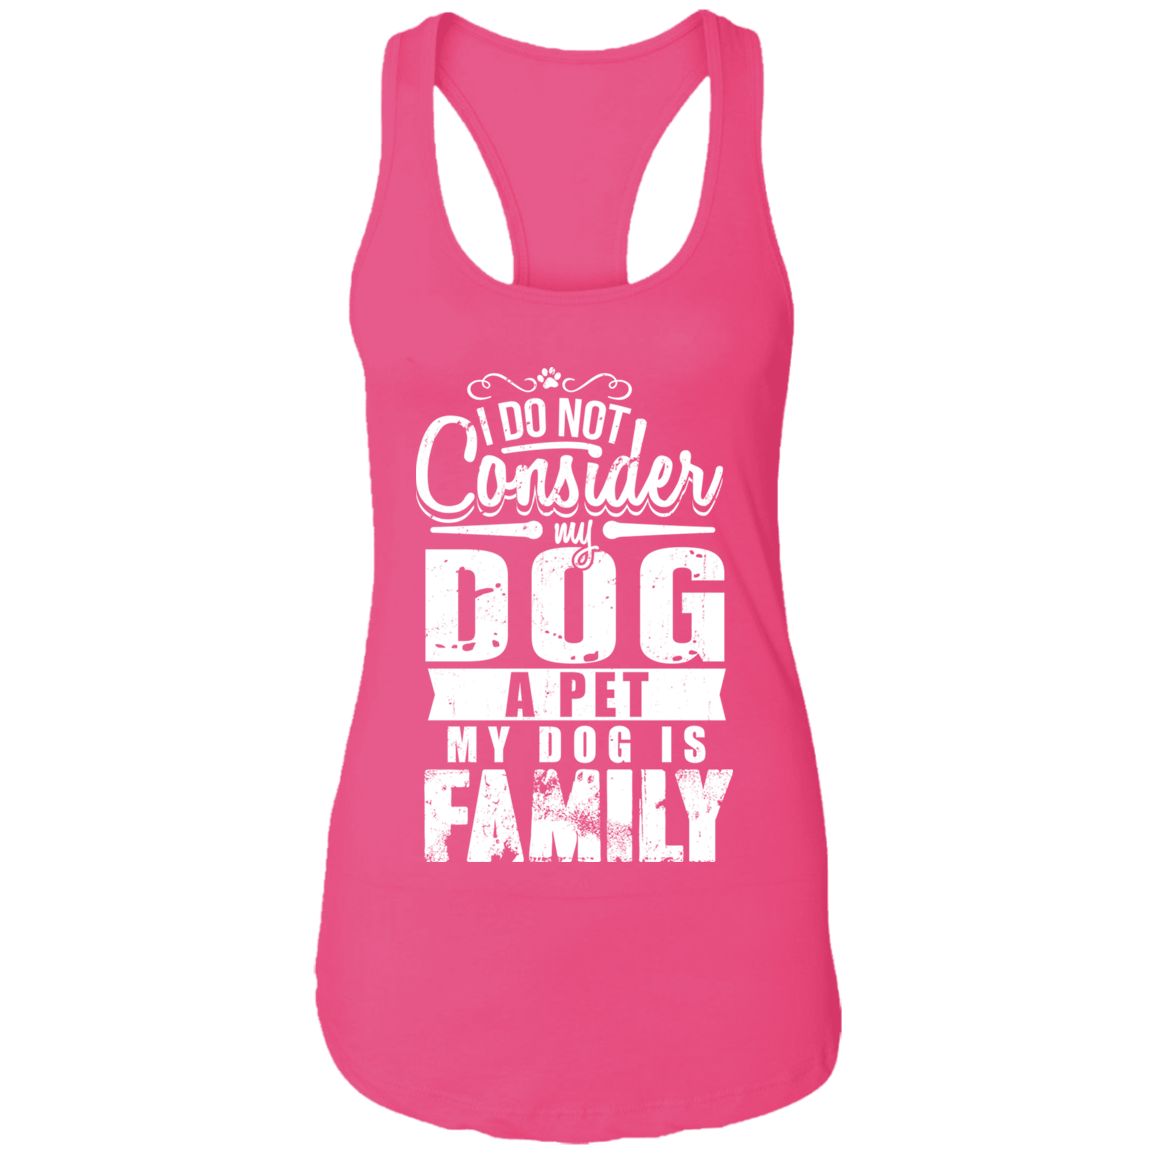 My Dog Is Family - Ladies Racer Back Tank.